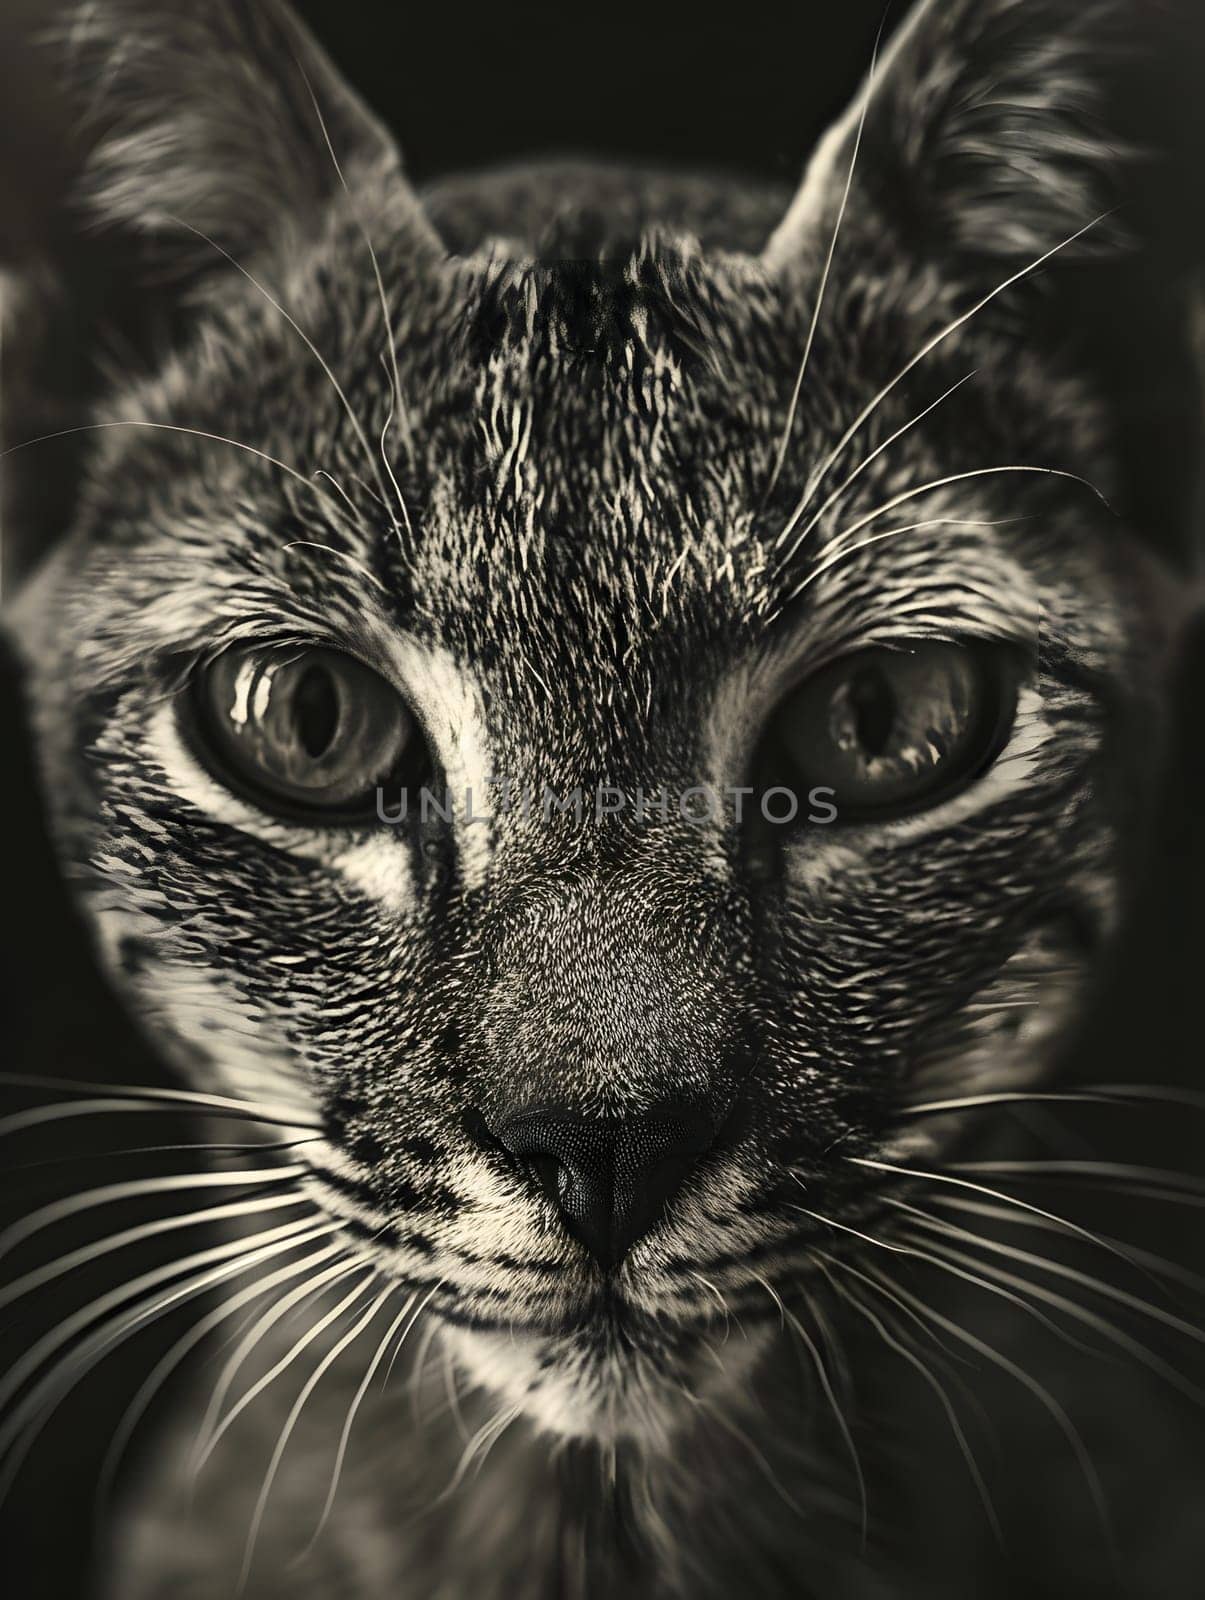 A monochromatic image capturing the head of a Felidae, showcasing its striking eye with a mesmerizing iris and whiskers adorning its carnivorous snout